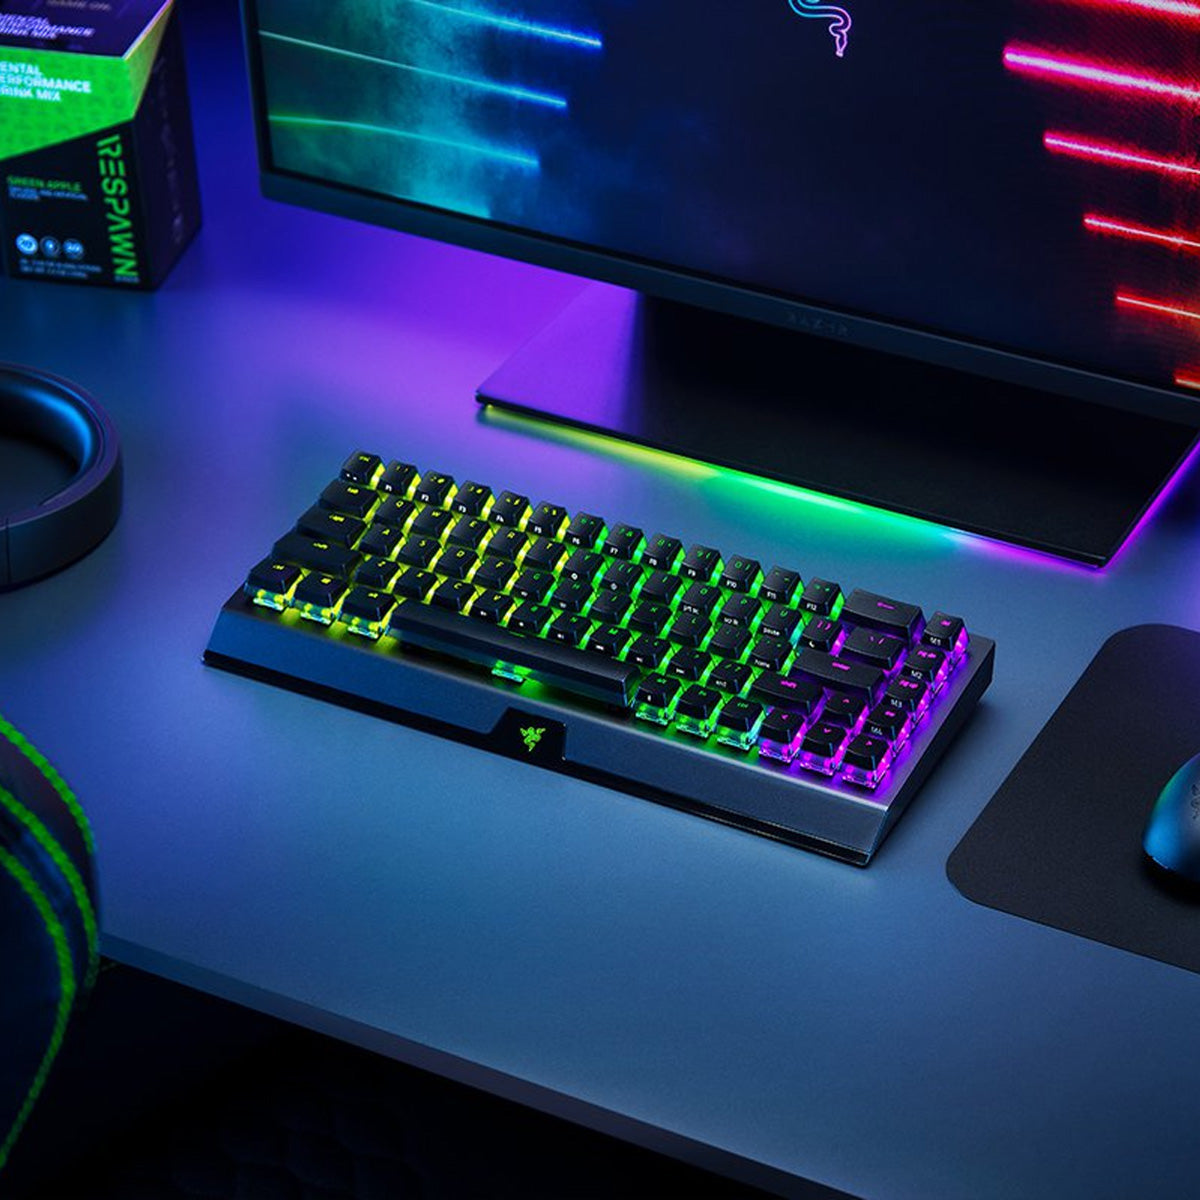 Razer BlackWidow V3 Mechanical Gaming Keyboard: Green Mechanical Switches -  Tactile & Clicky - Chroma RGB Lighting - Compact Form Factor 